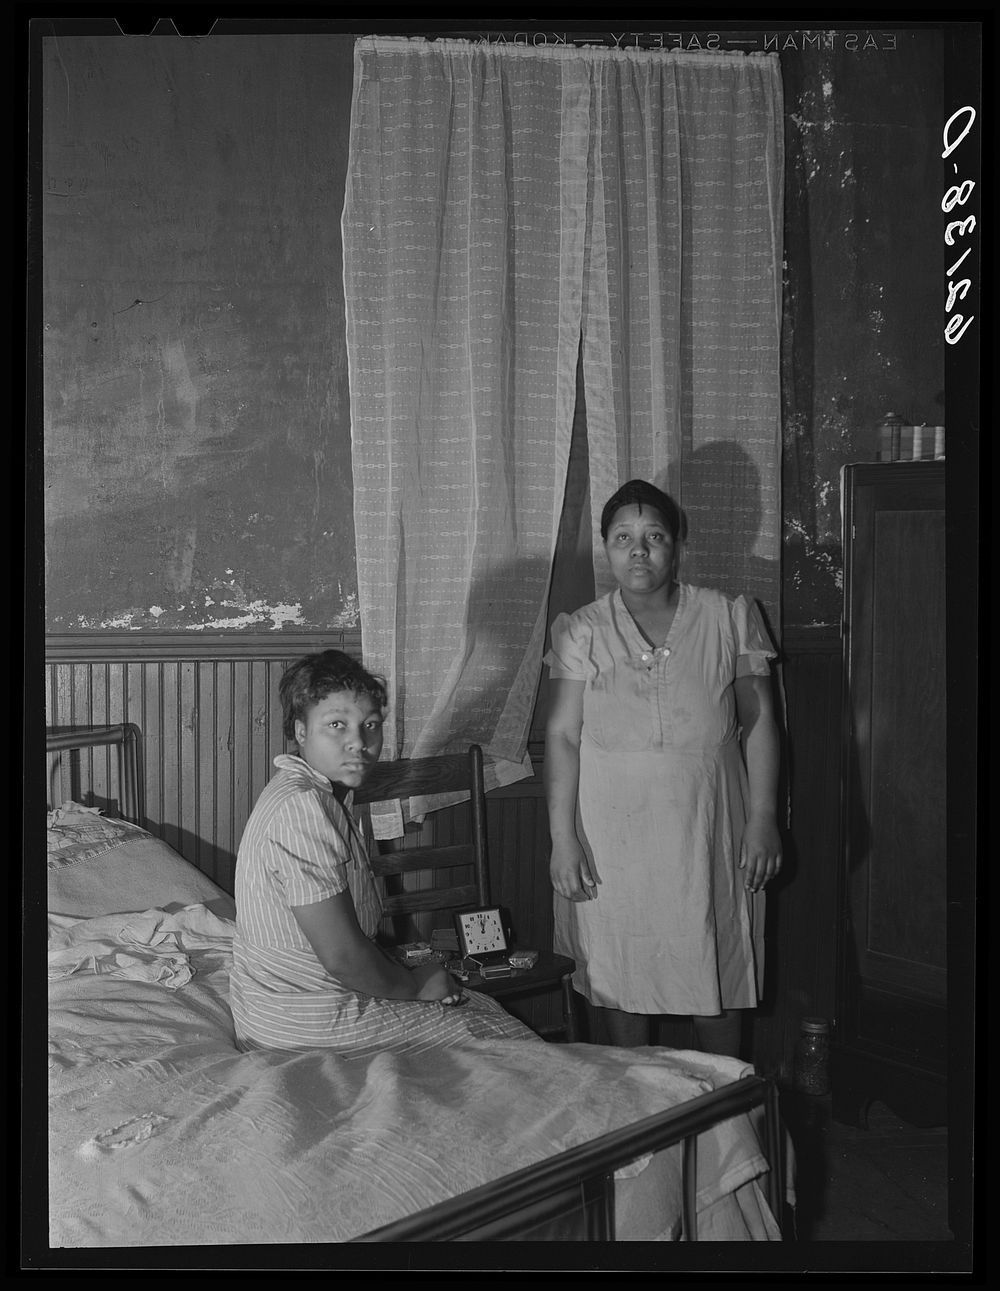 Wife and daughter of steelworker. Aliquippa, Pennsylvania. Sourced from the Library of Congress.